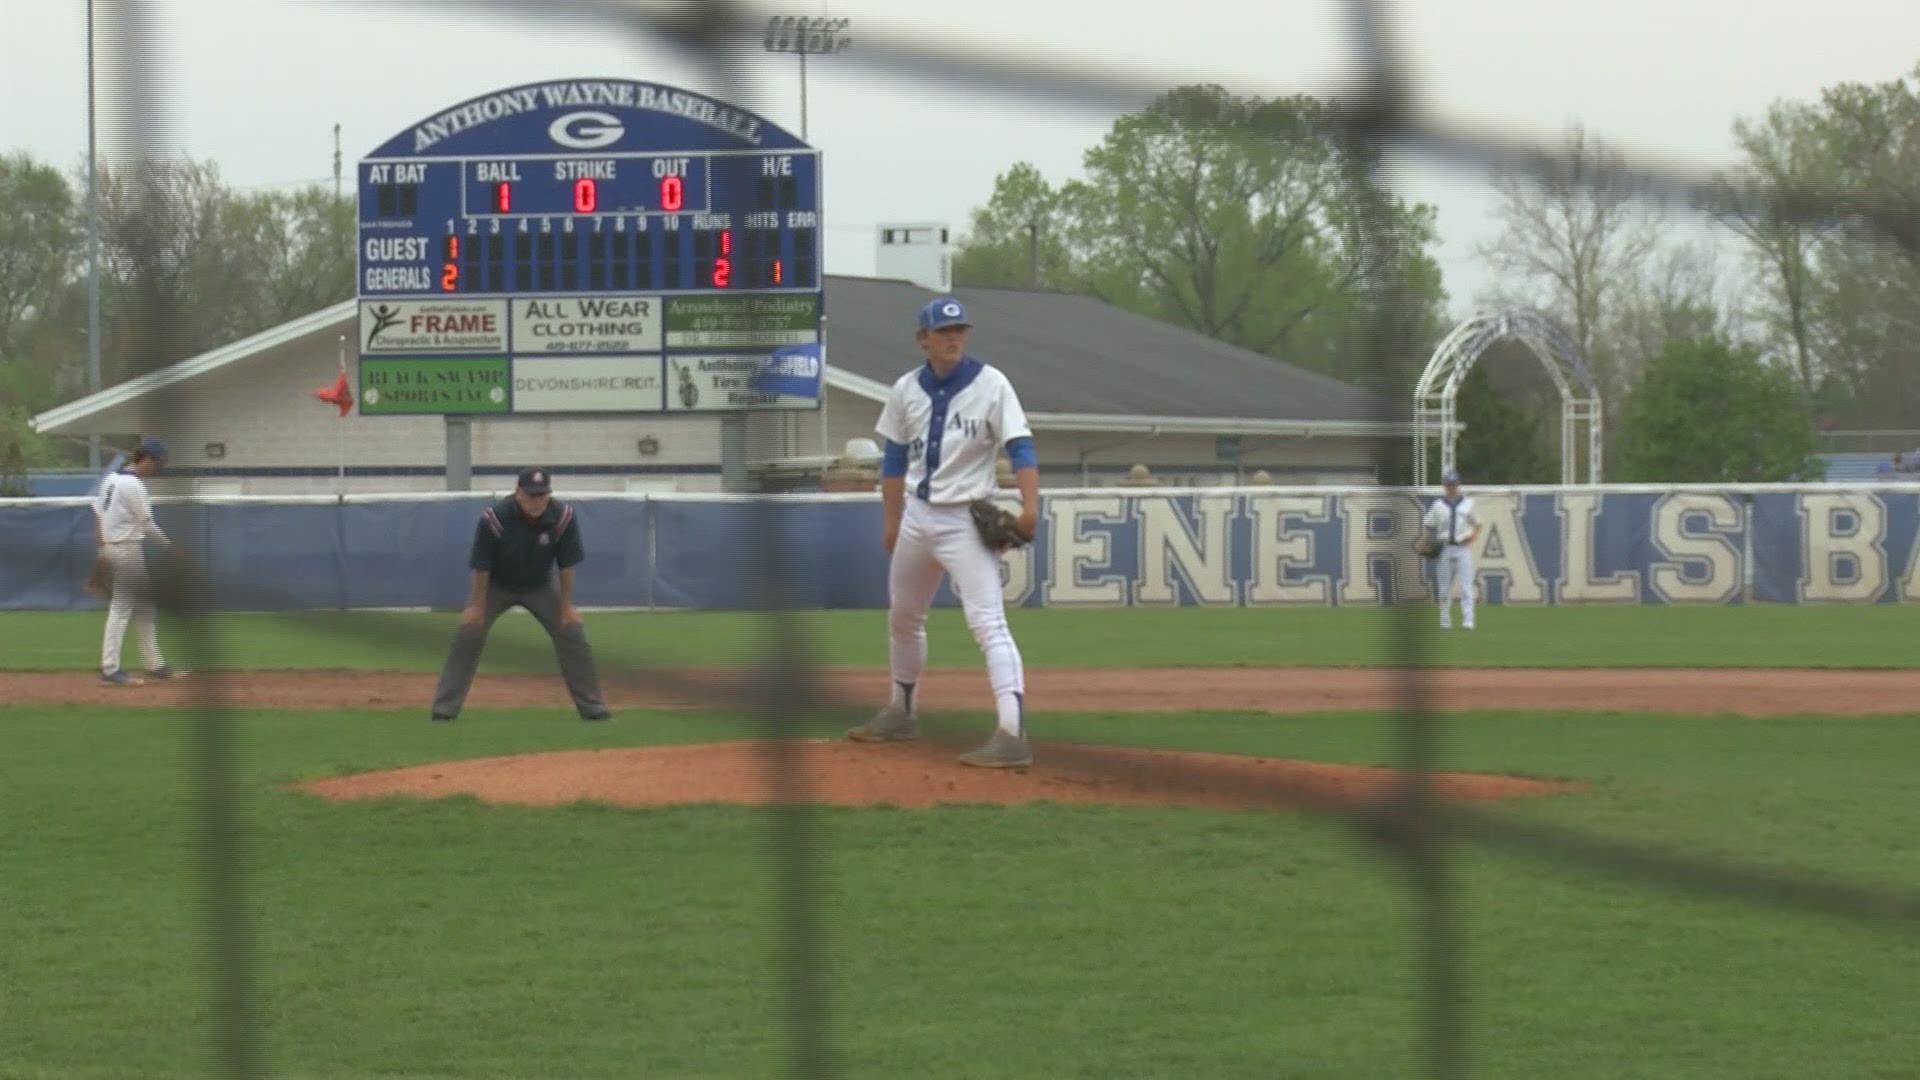 Less than three weeks ago, Roder awoke from a nap in excruciating pain. After an emergency appendectomy, he made his return to the mound for the Generals.